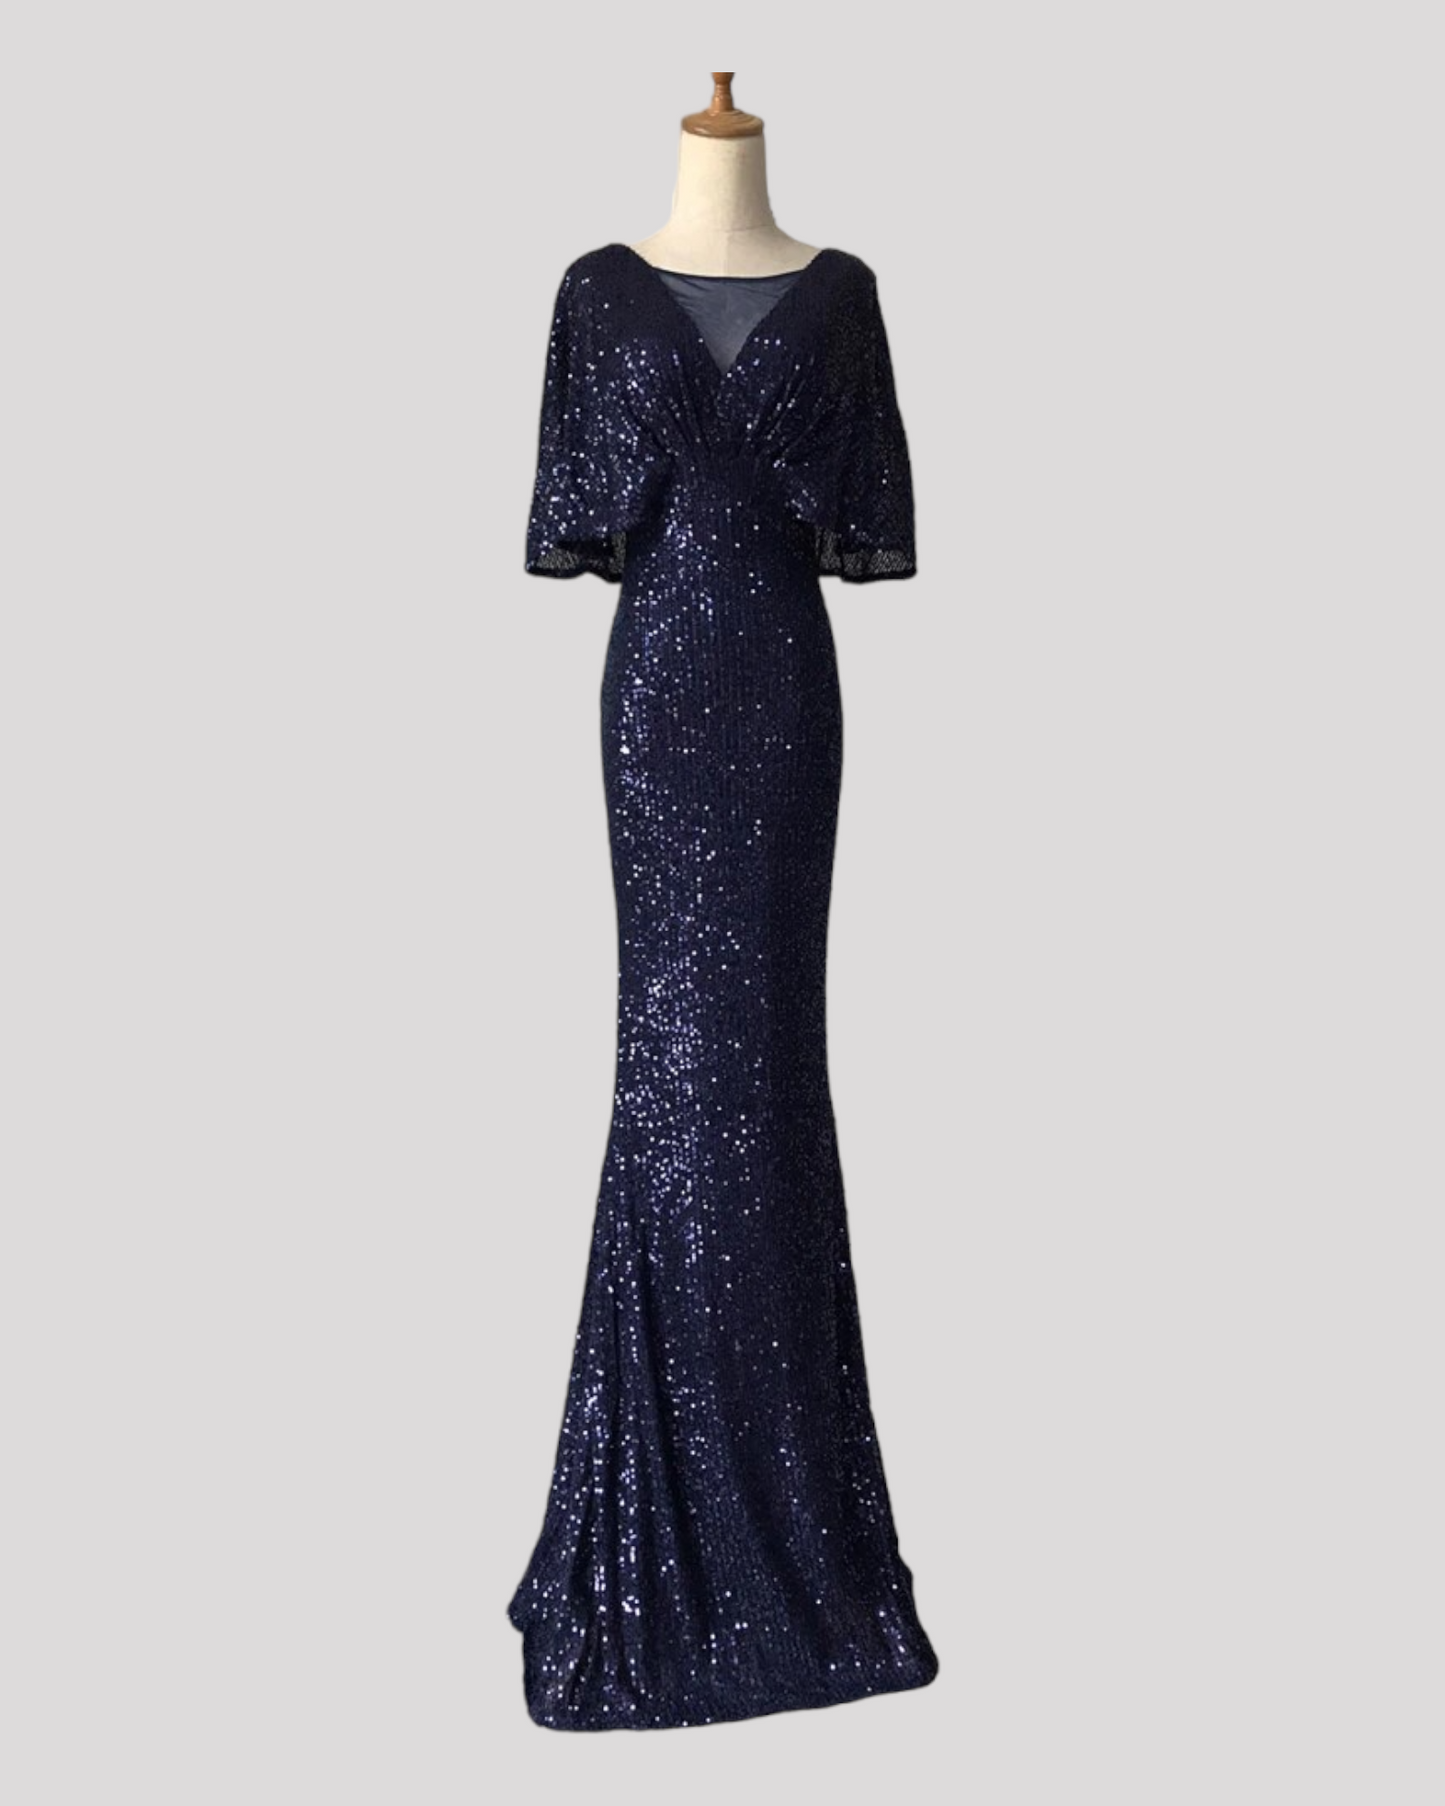 Cape Style Sequin Mermaid Evening Dress available in 6 colours